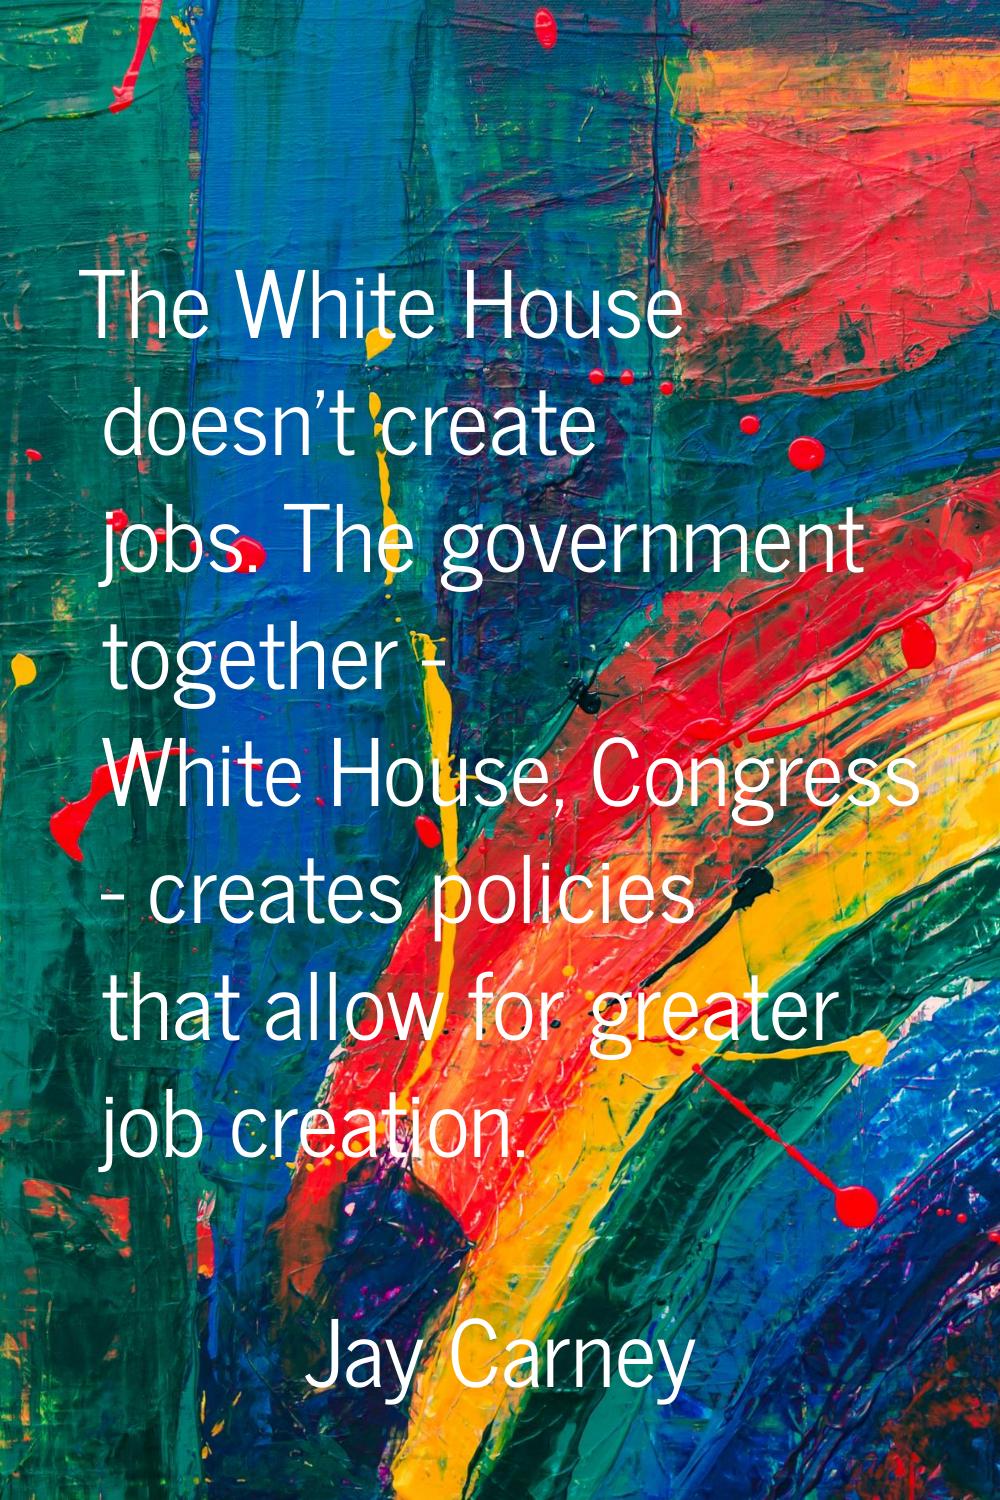 The White House doesn't create jobs. The government together - White House, Congress - creates poli